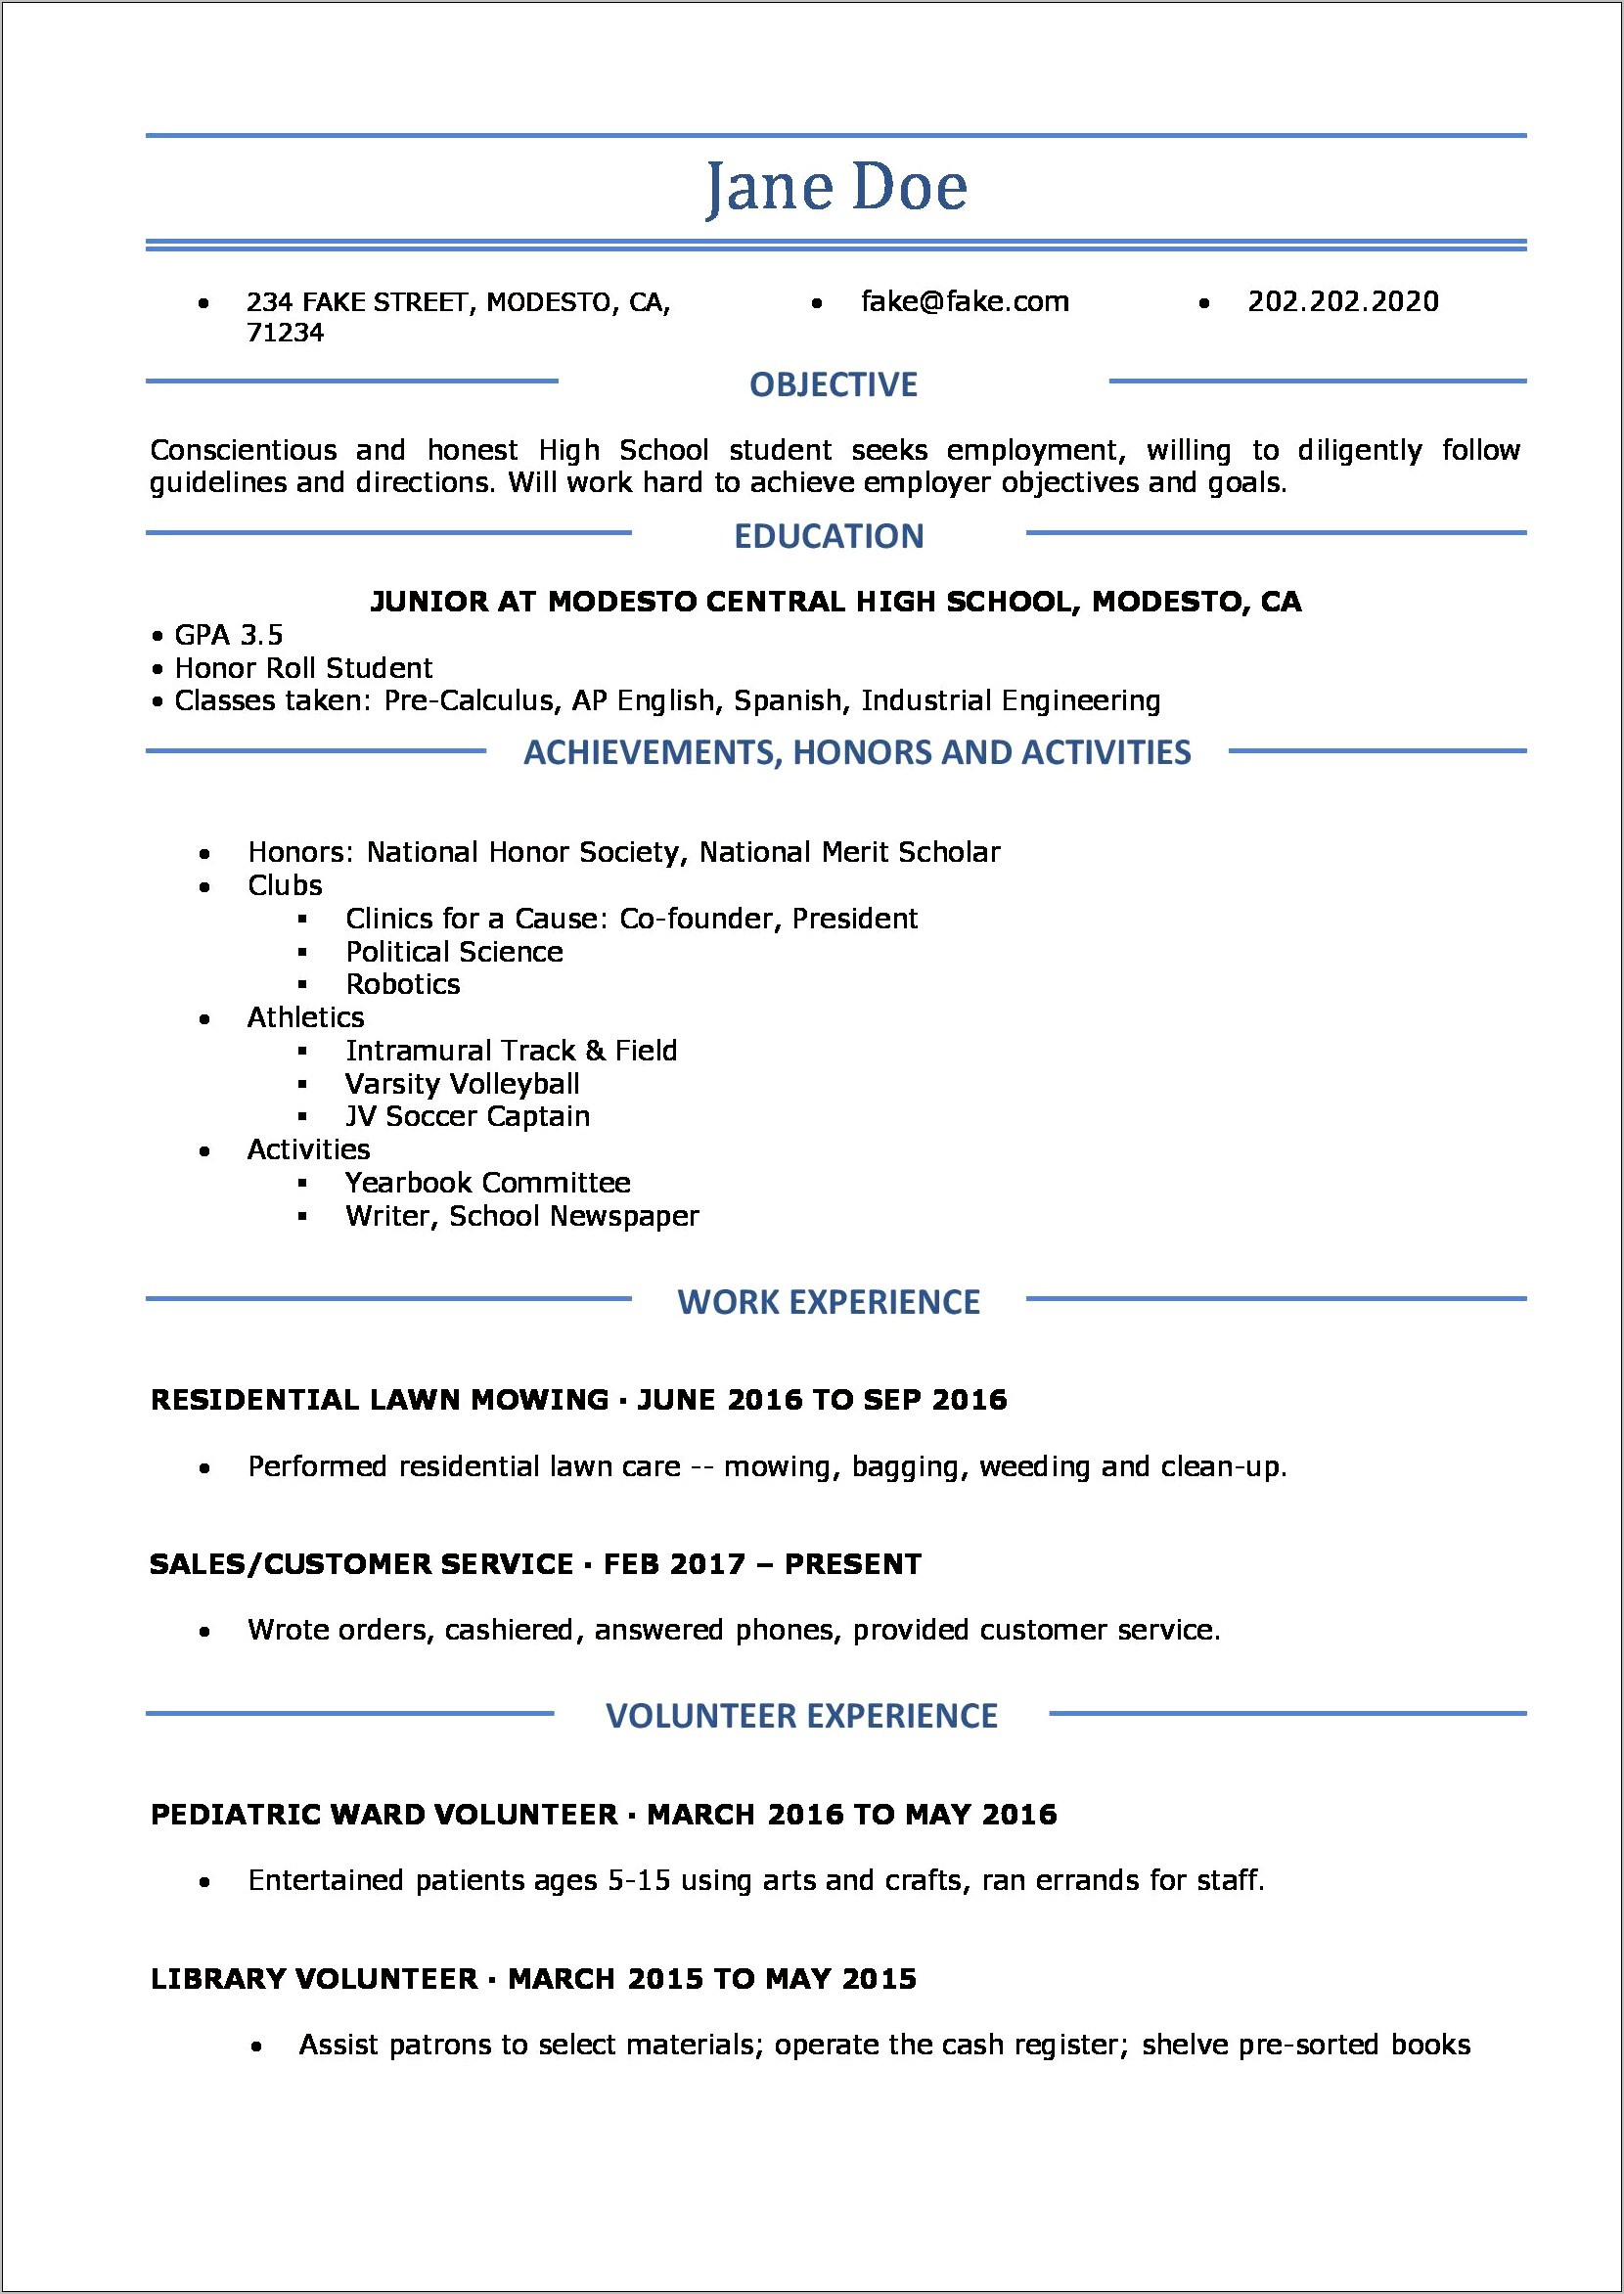 Resume Outline For High School Students